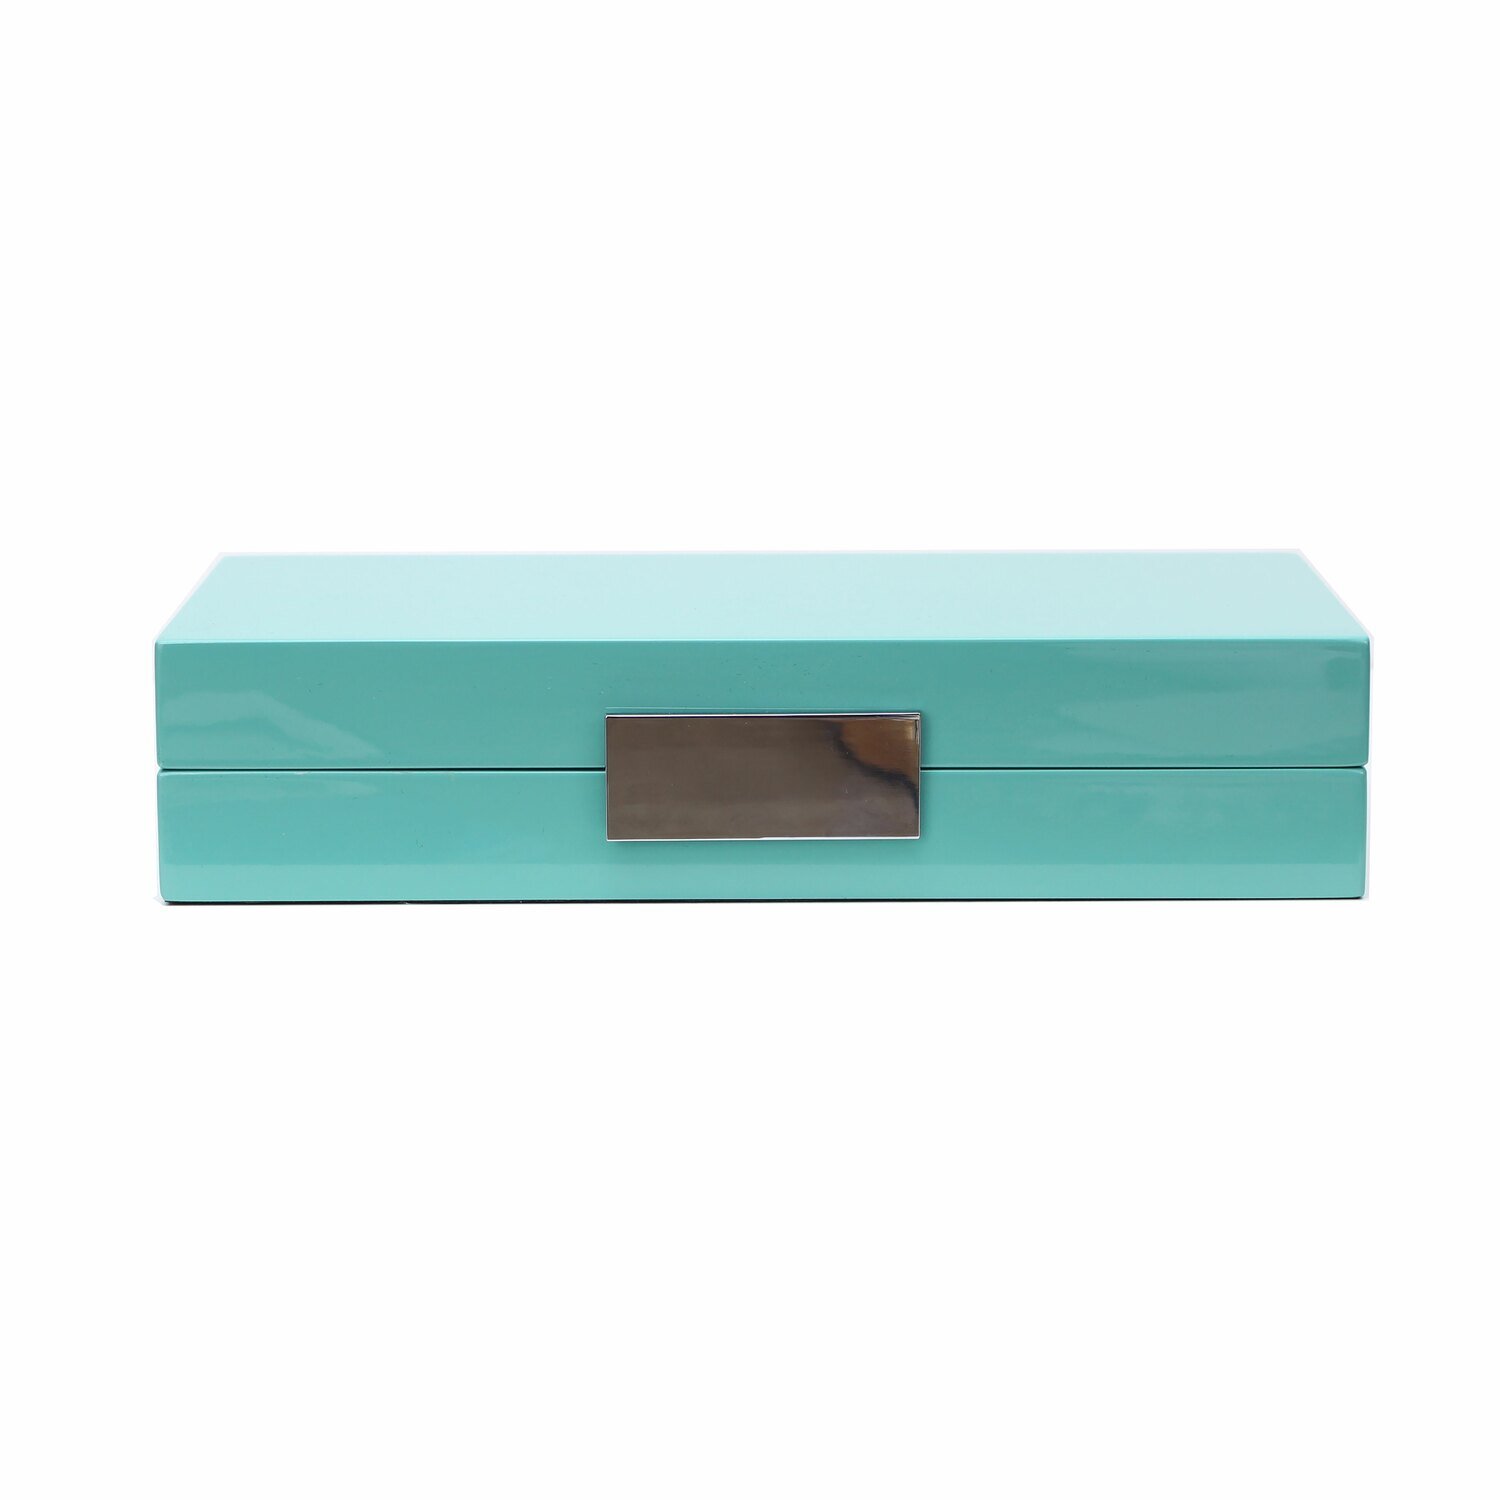 Addison Ross Green Shagreen Storage Box4 x 9 Inch Lacquer BX1256